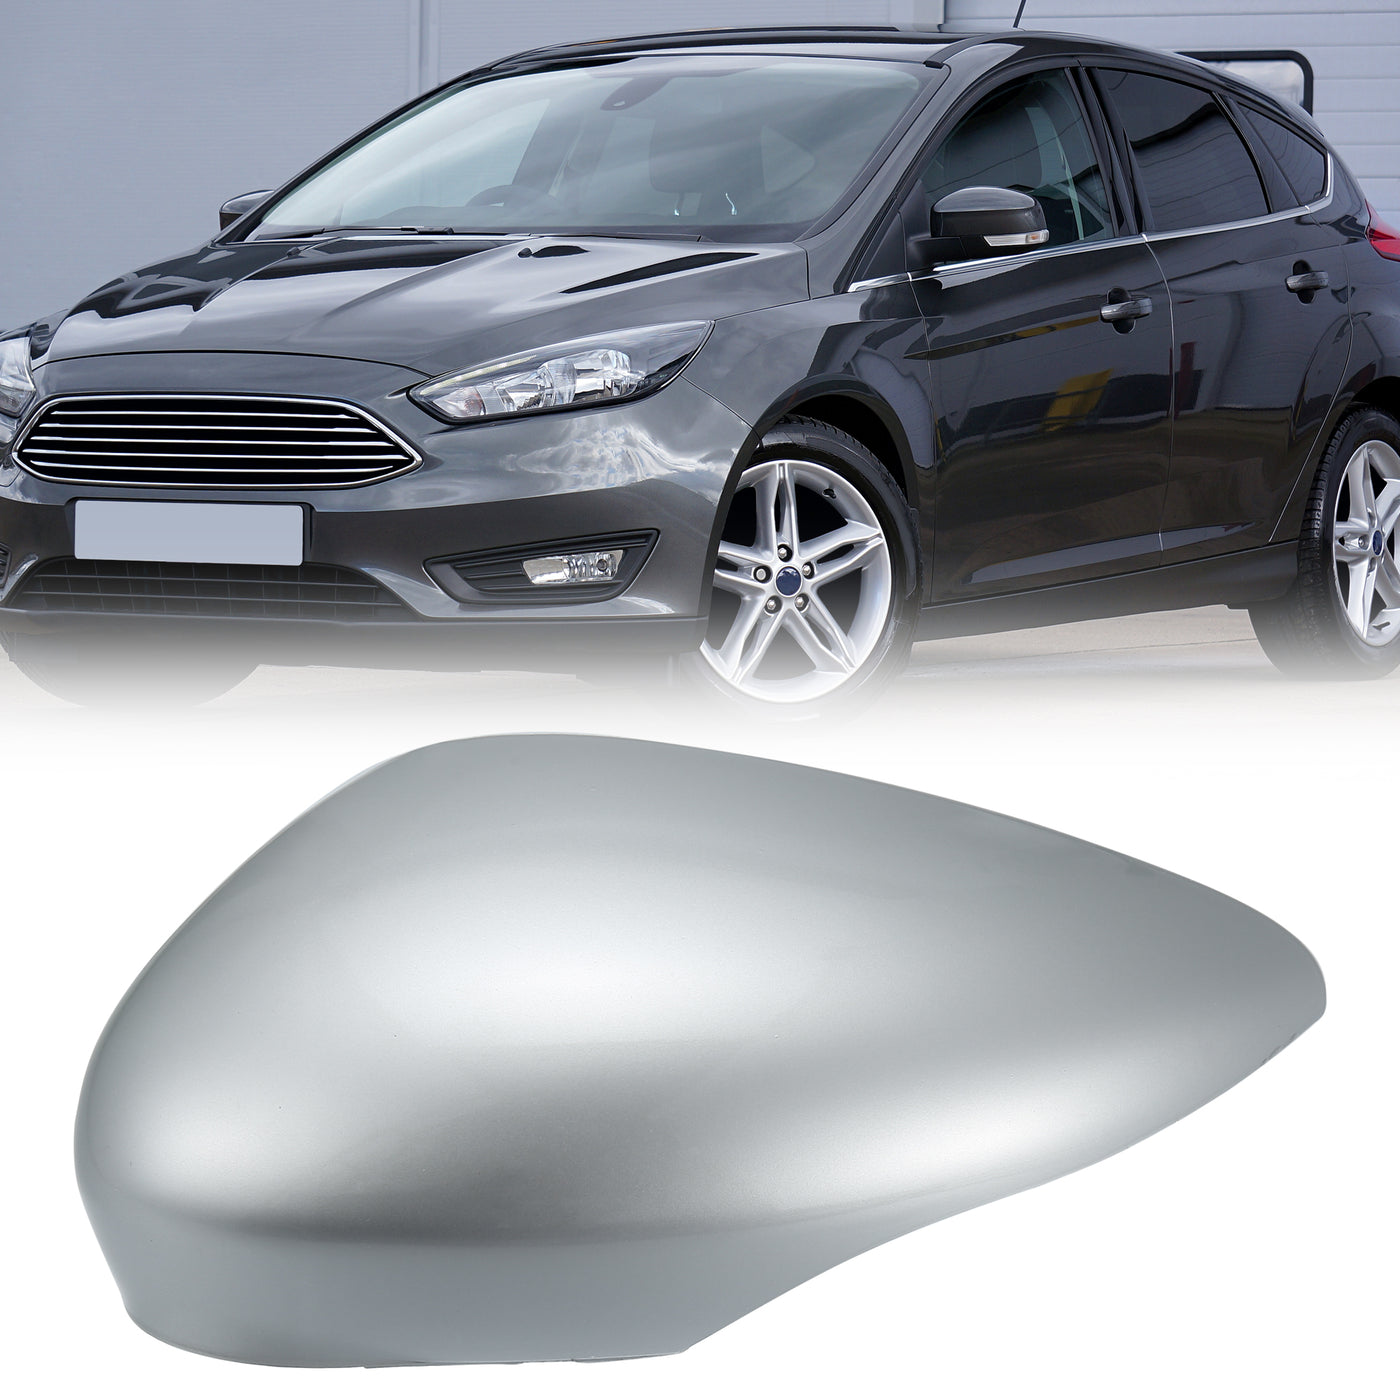 X AUTOHAUX Silver Tone Left Side Car Side Door Wing Mirror Cover Rear View Mirror Cap for Ford Fiesta MK7 2008 2009 2010 2011 2012 2013 2014 2015 2016 2017